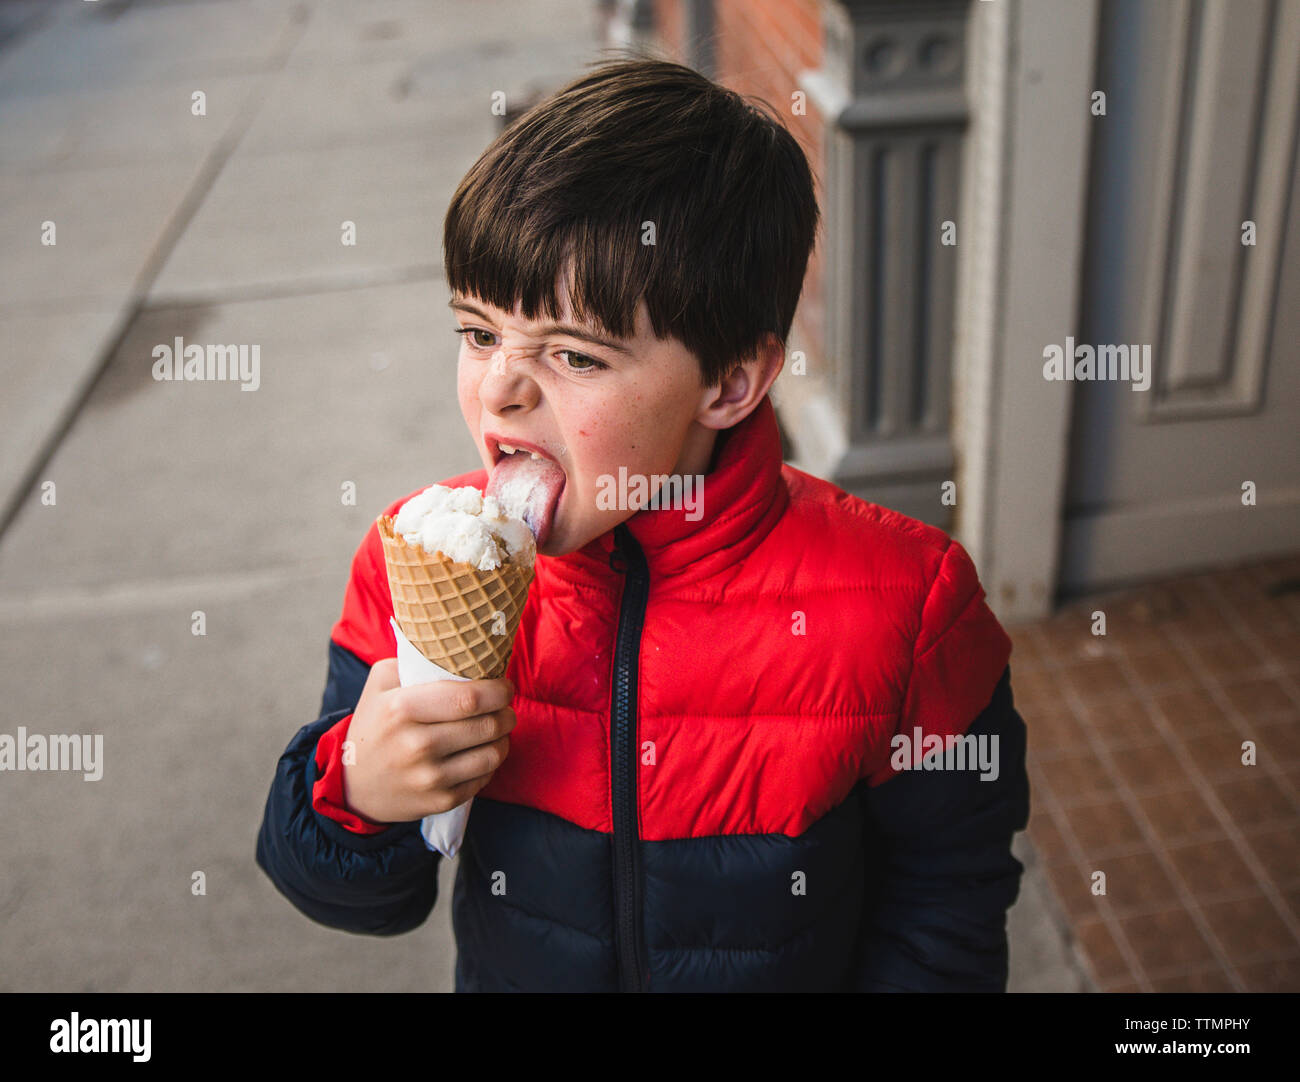 Boy looking away while licking ice cream on footpath in city Stock Photo